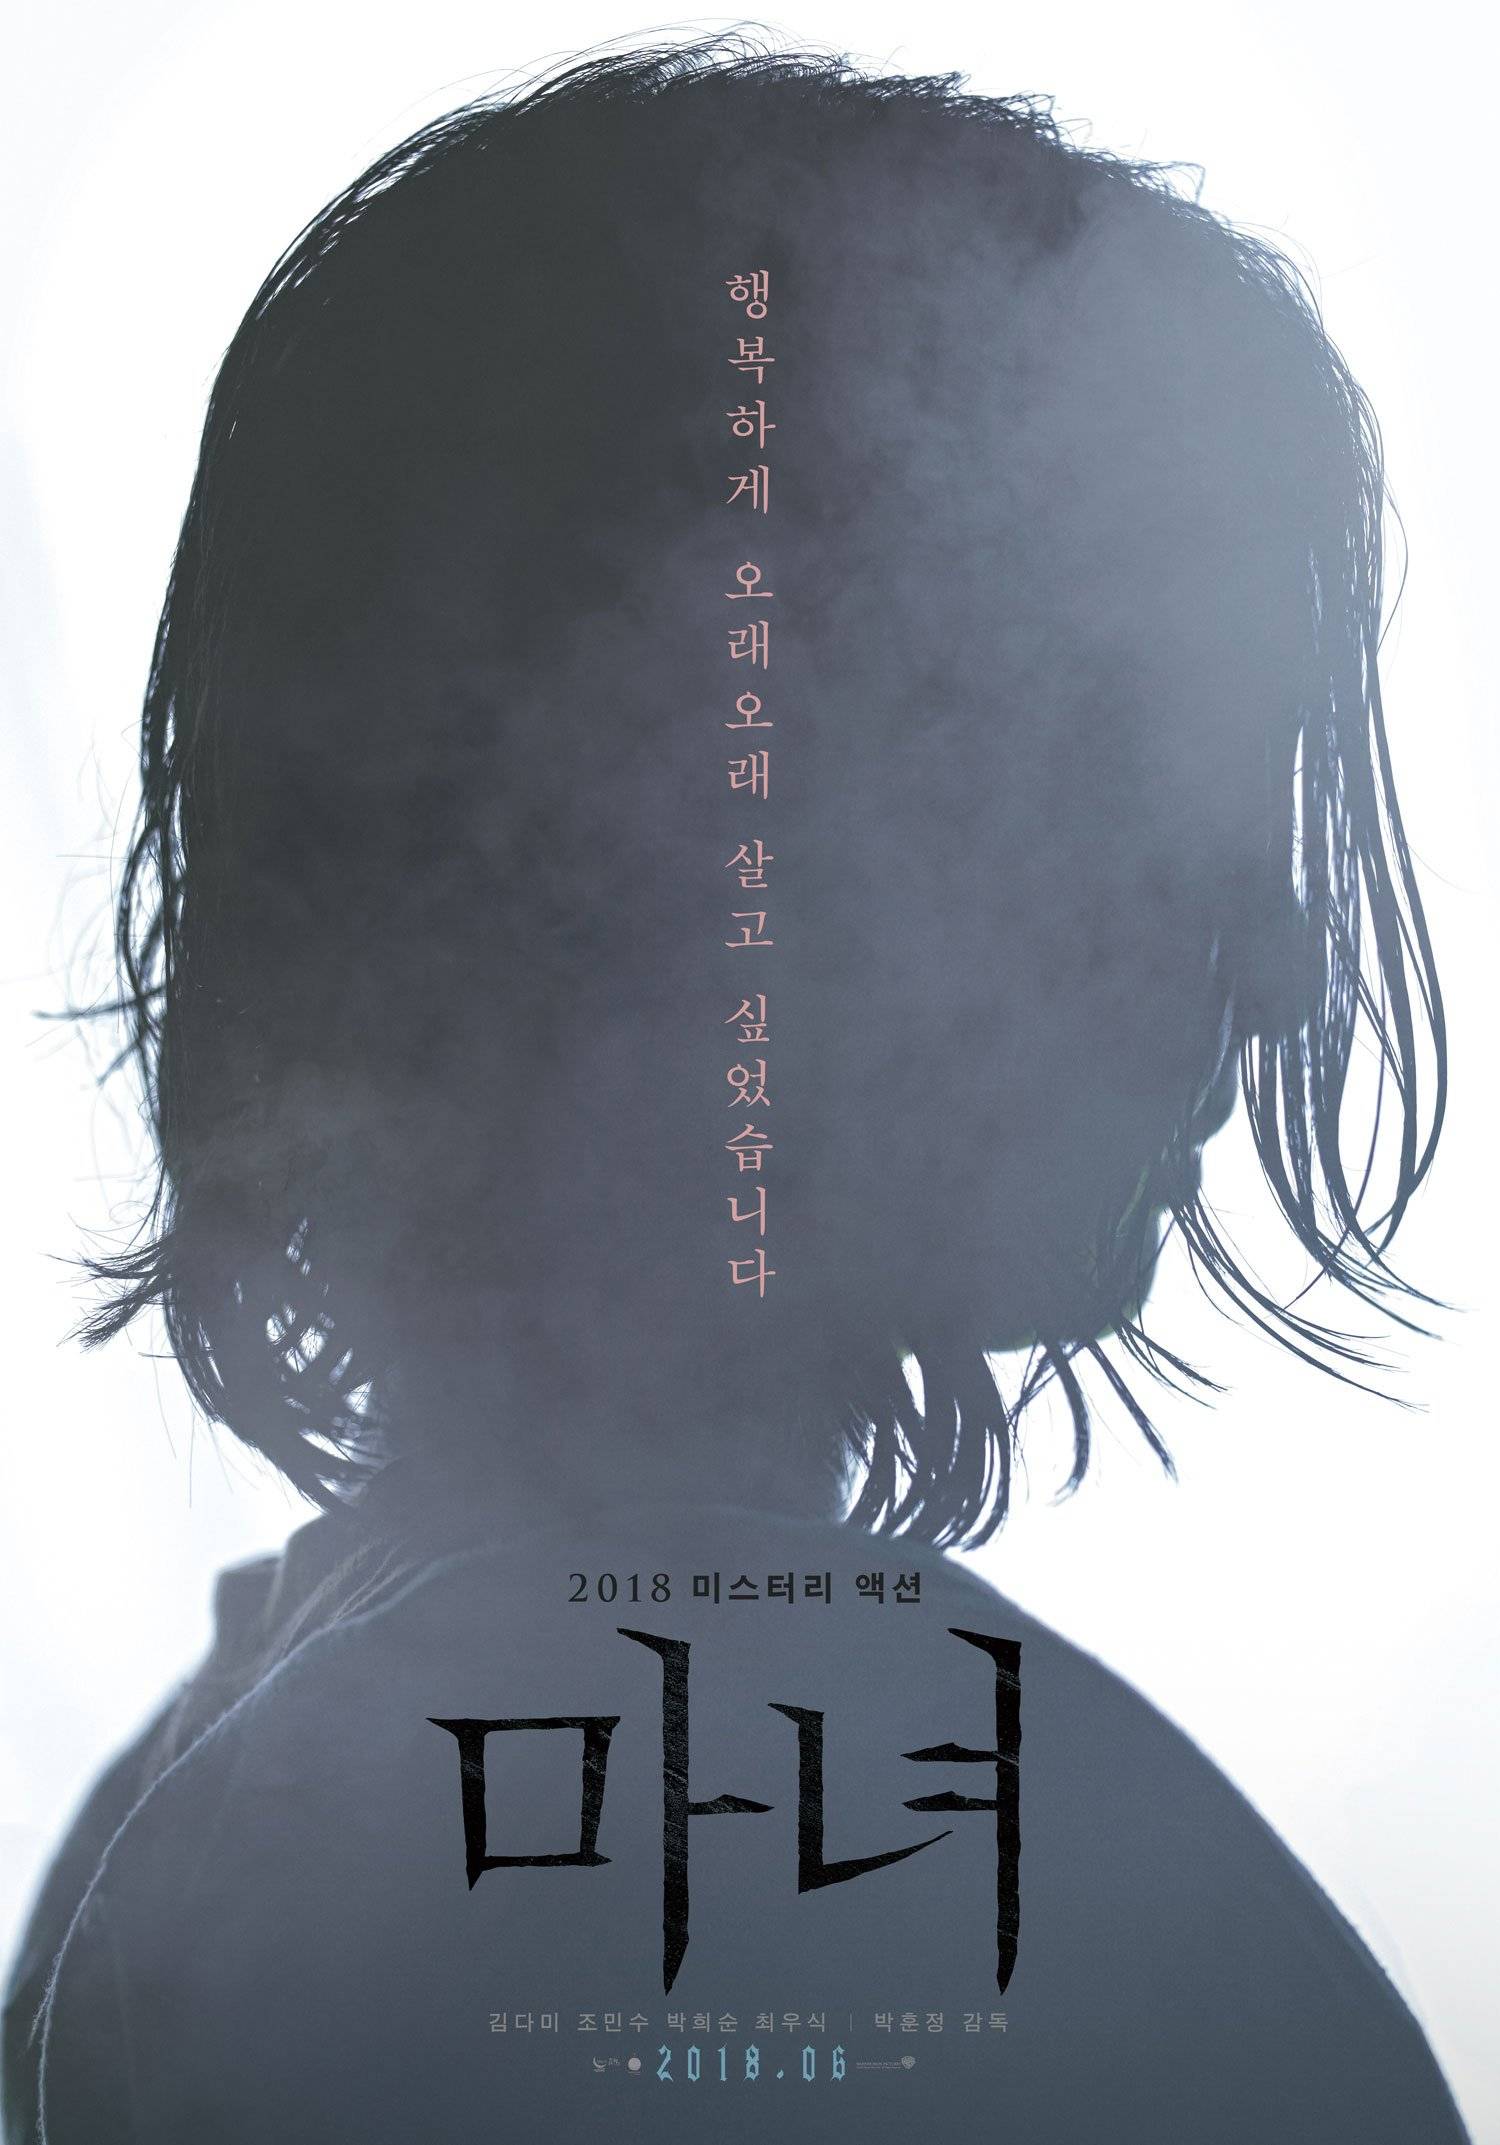 Photo Poster Released for the Upcoming Korean Movie "The ...